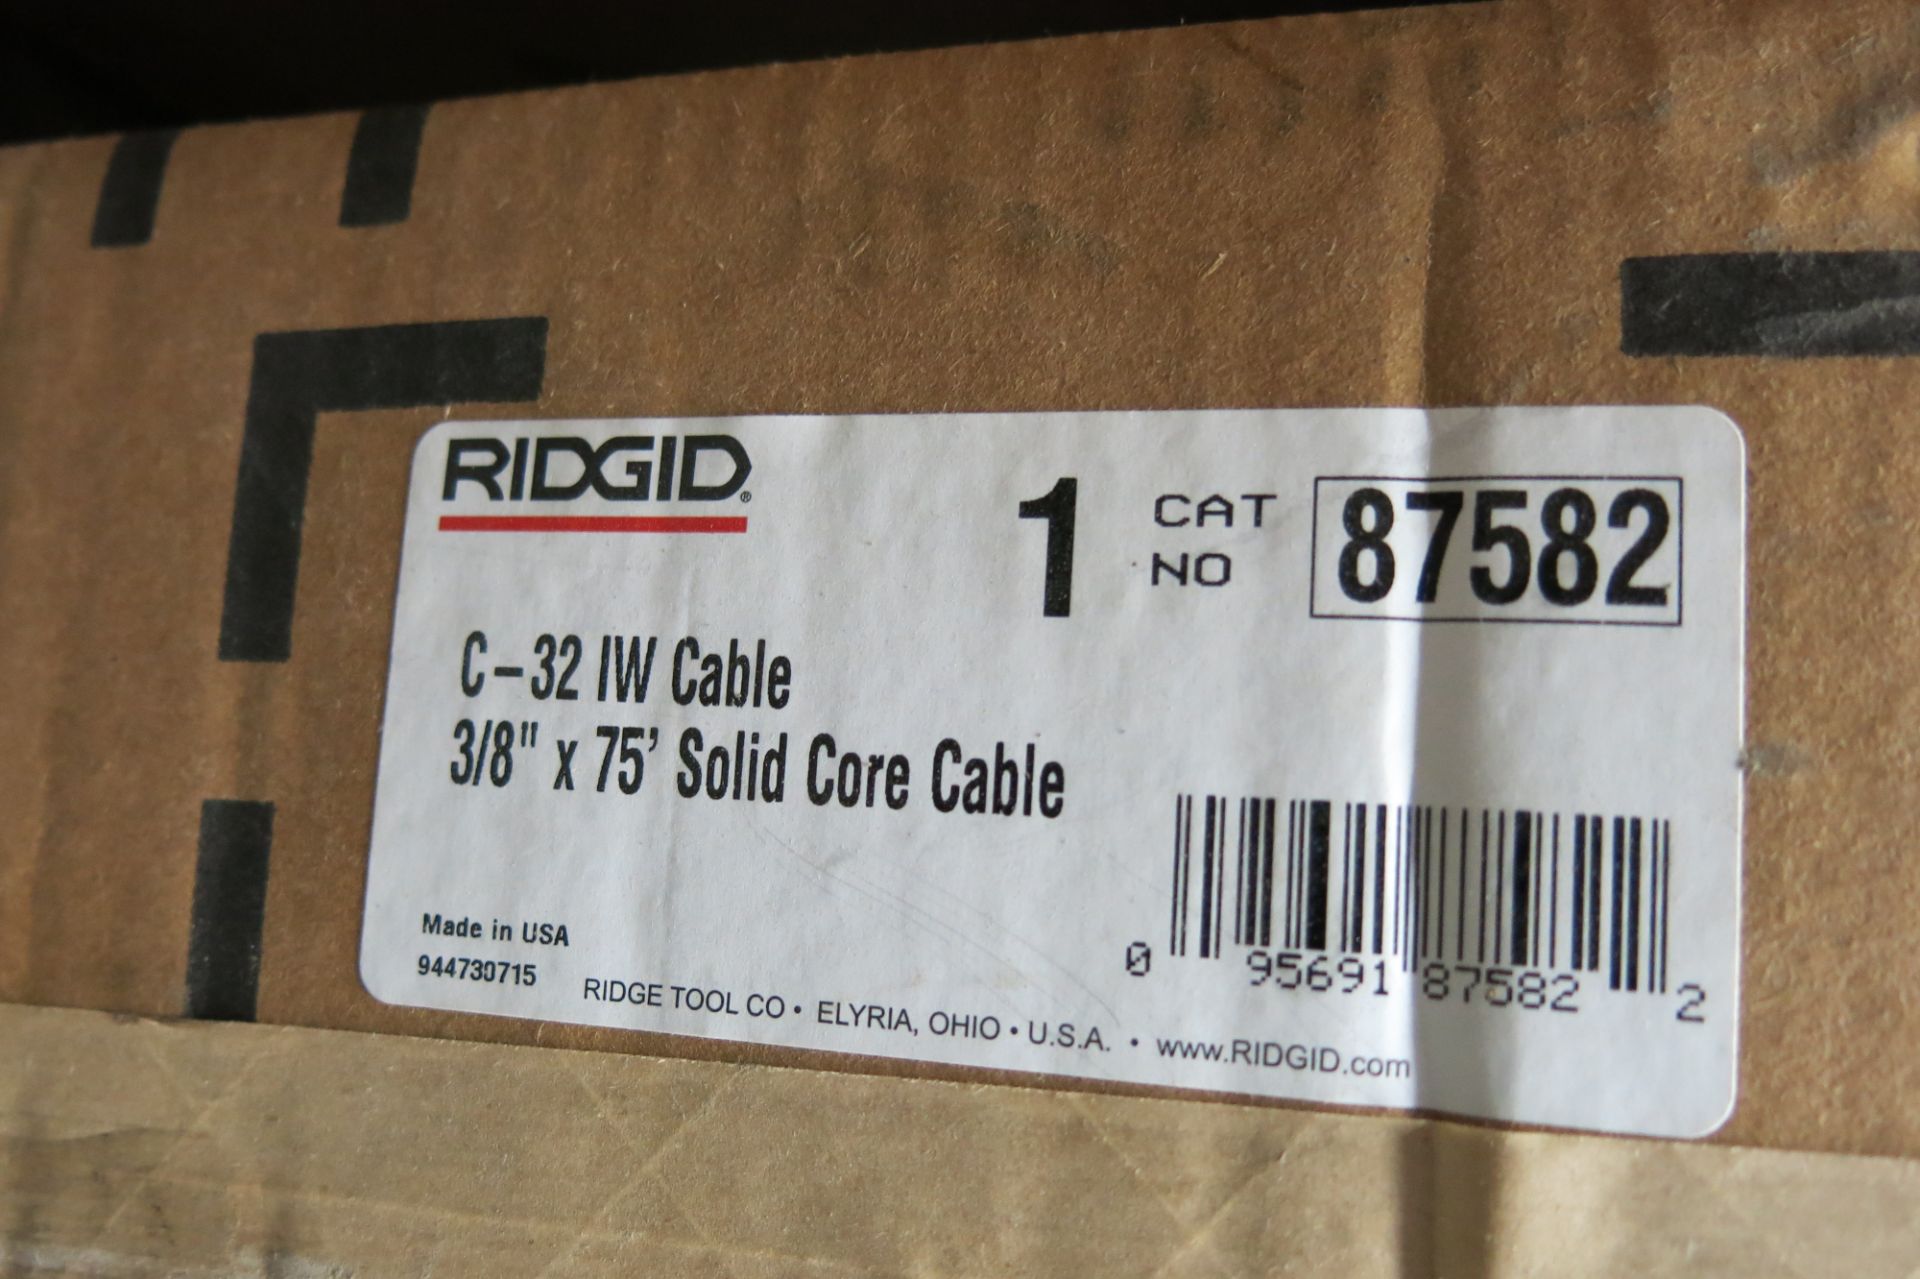 LOT OF RIDGID, C-45, 87597, IW CABLE, 1/2" X 75', SOLID CORE CABLE, C-32, IW CABLE, 3/8" X 75', - Image 3 of 3